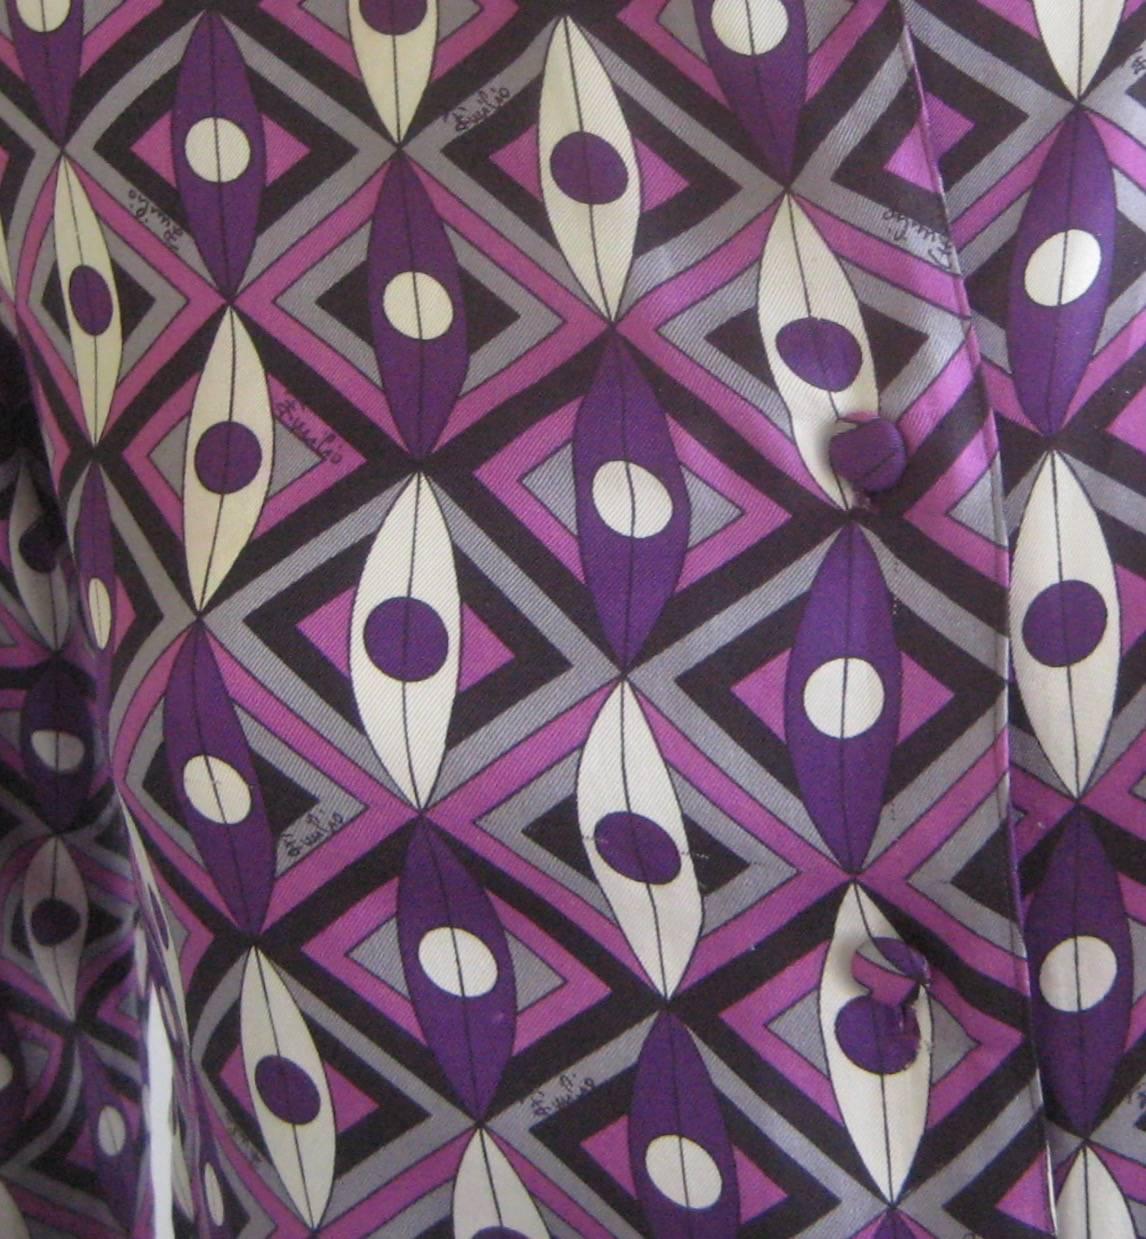 Lovely PUCCI silk blouse 
Silk covered buttons down the front
Gorgeous colors 
Excellent condition
This measures 36